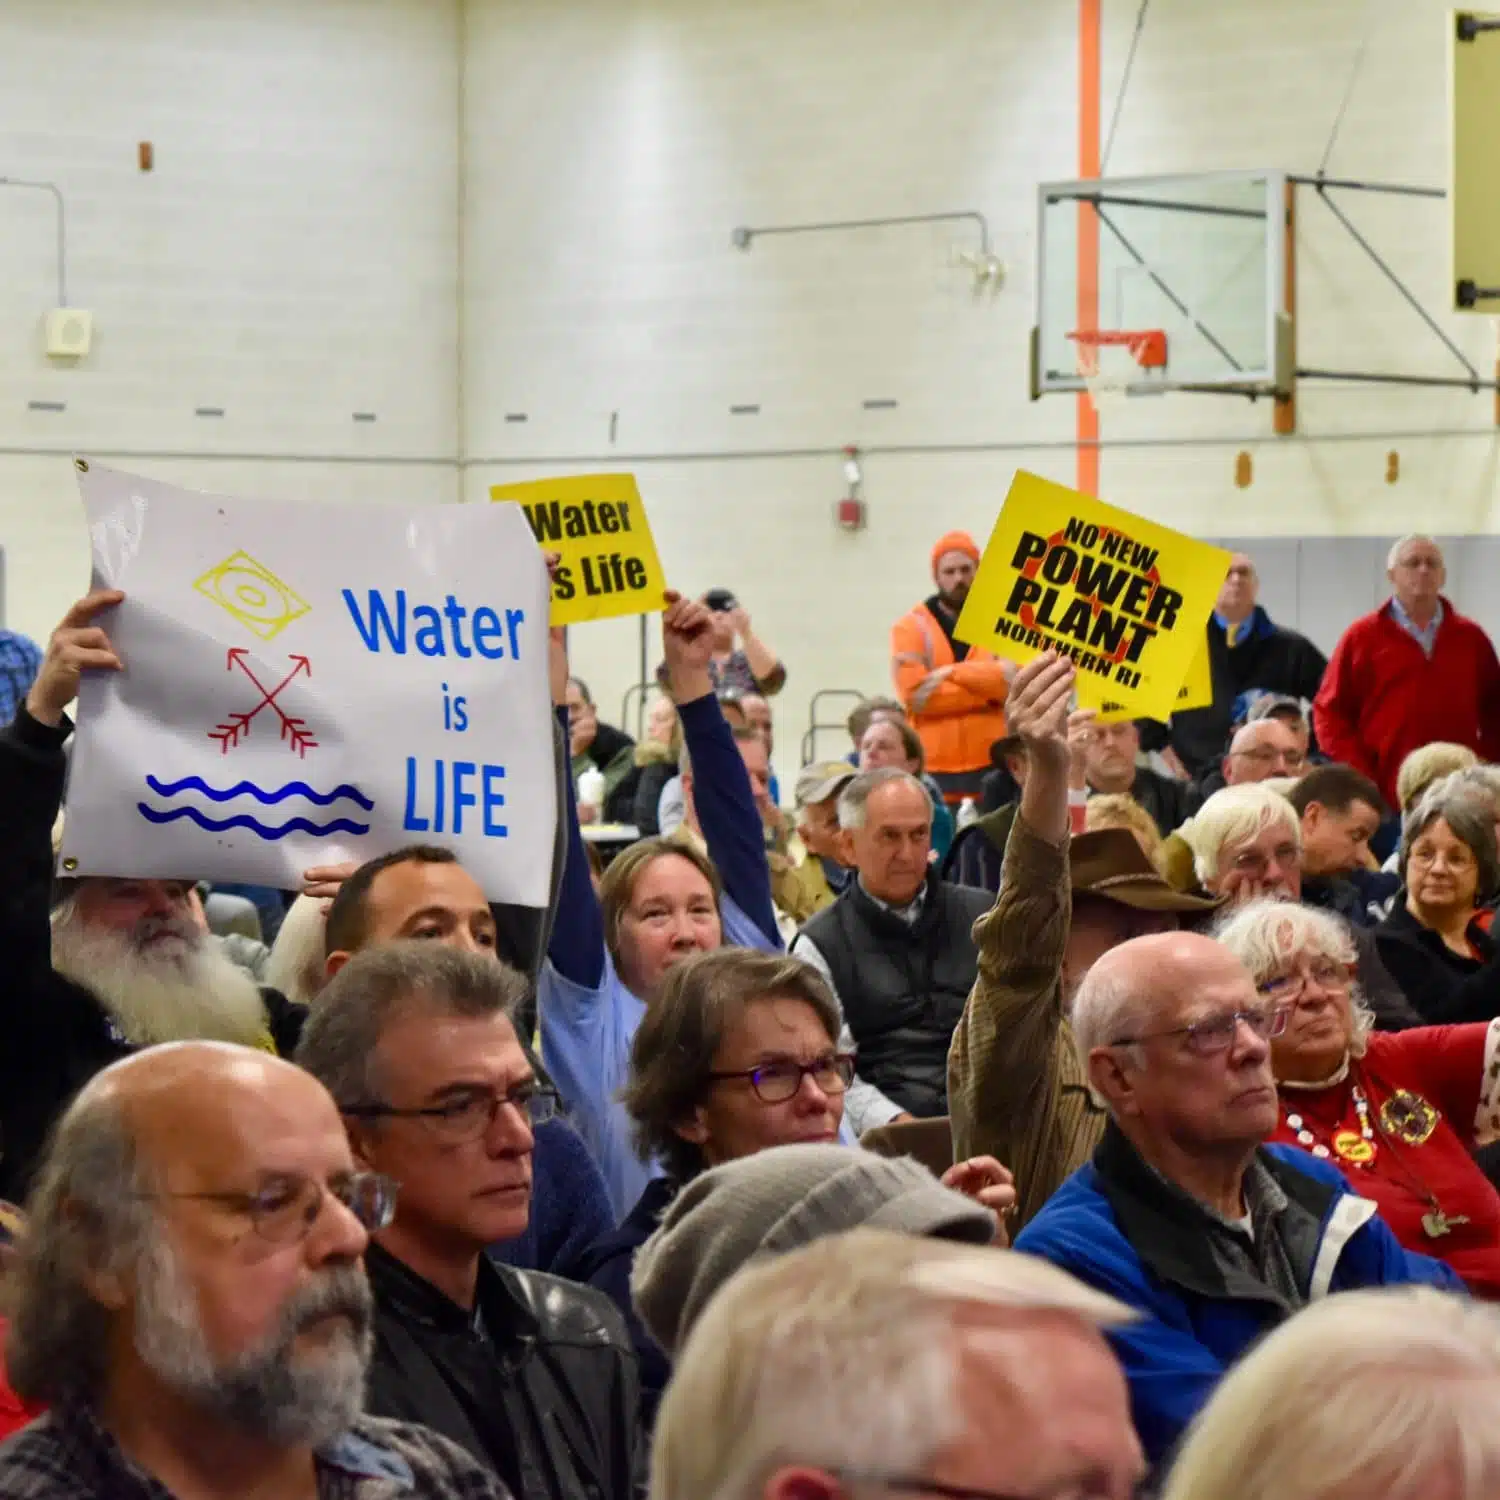 EFSB comes to Charlestown to discuss water, Invenergy denies residents water plan details